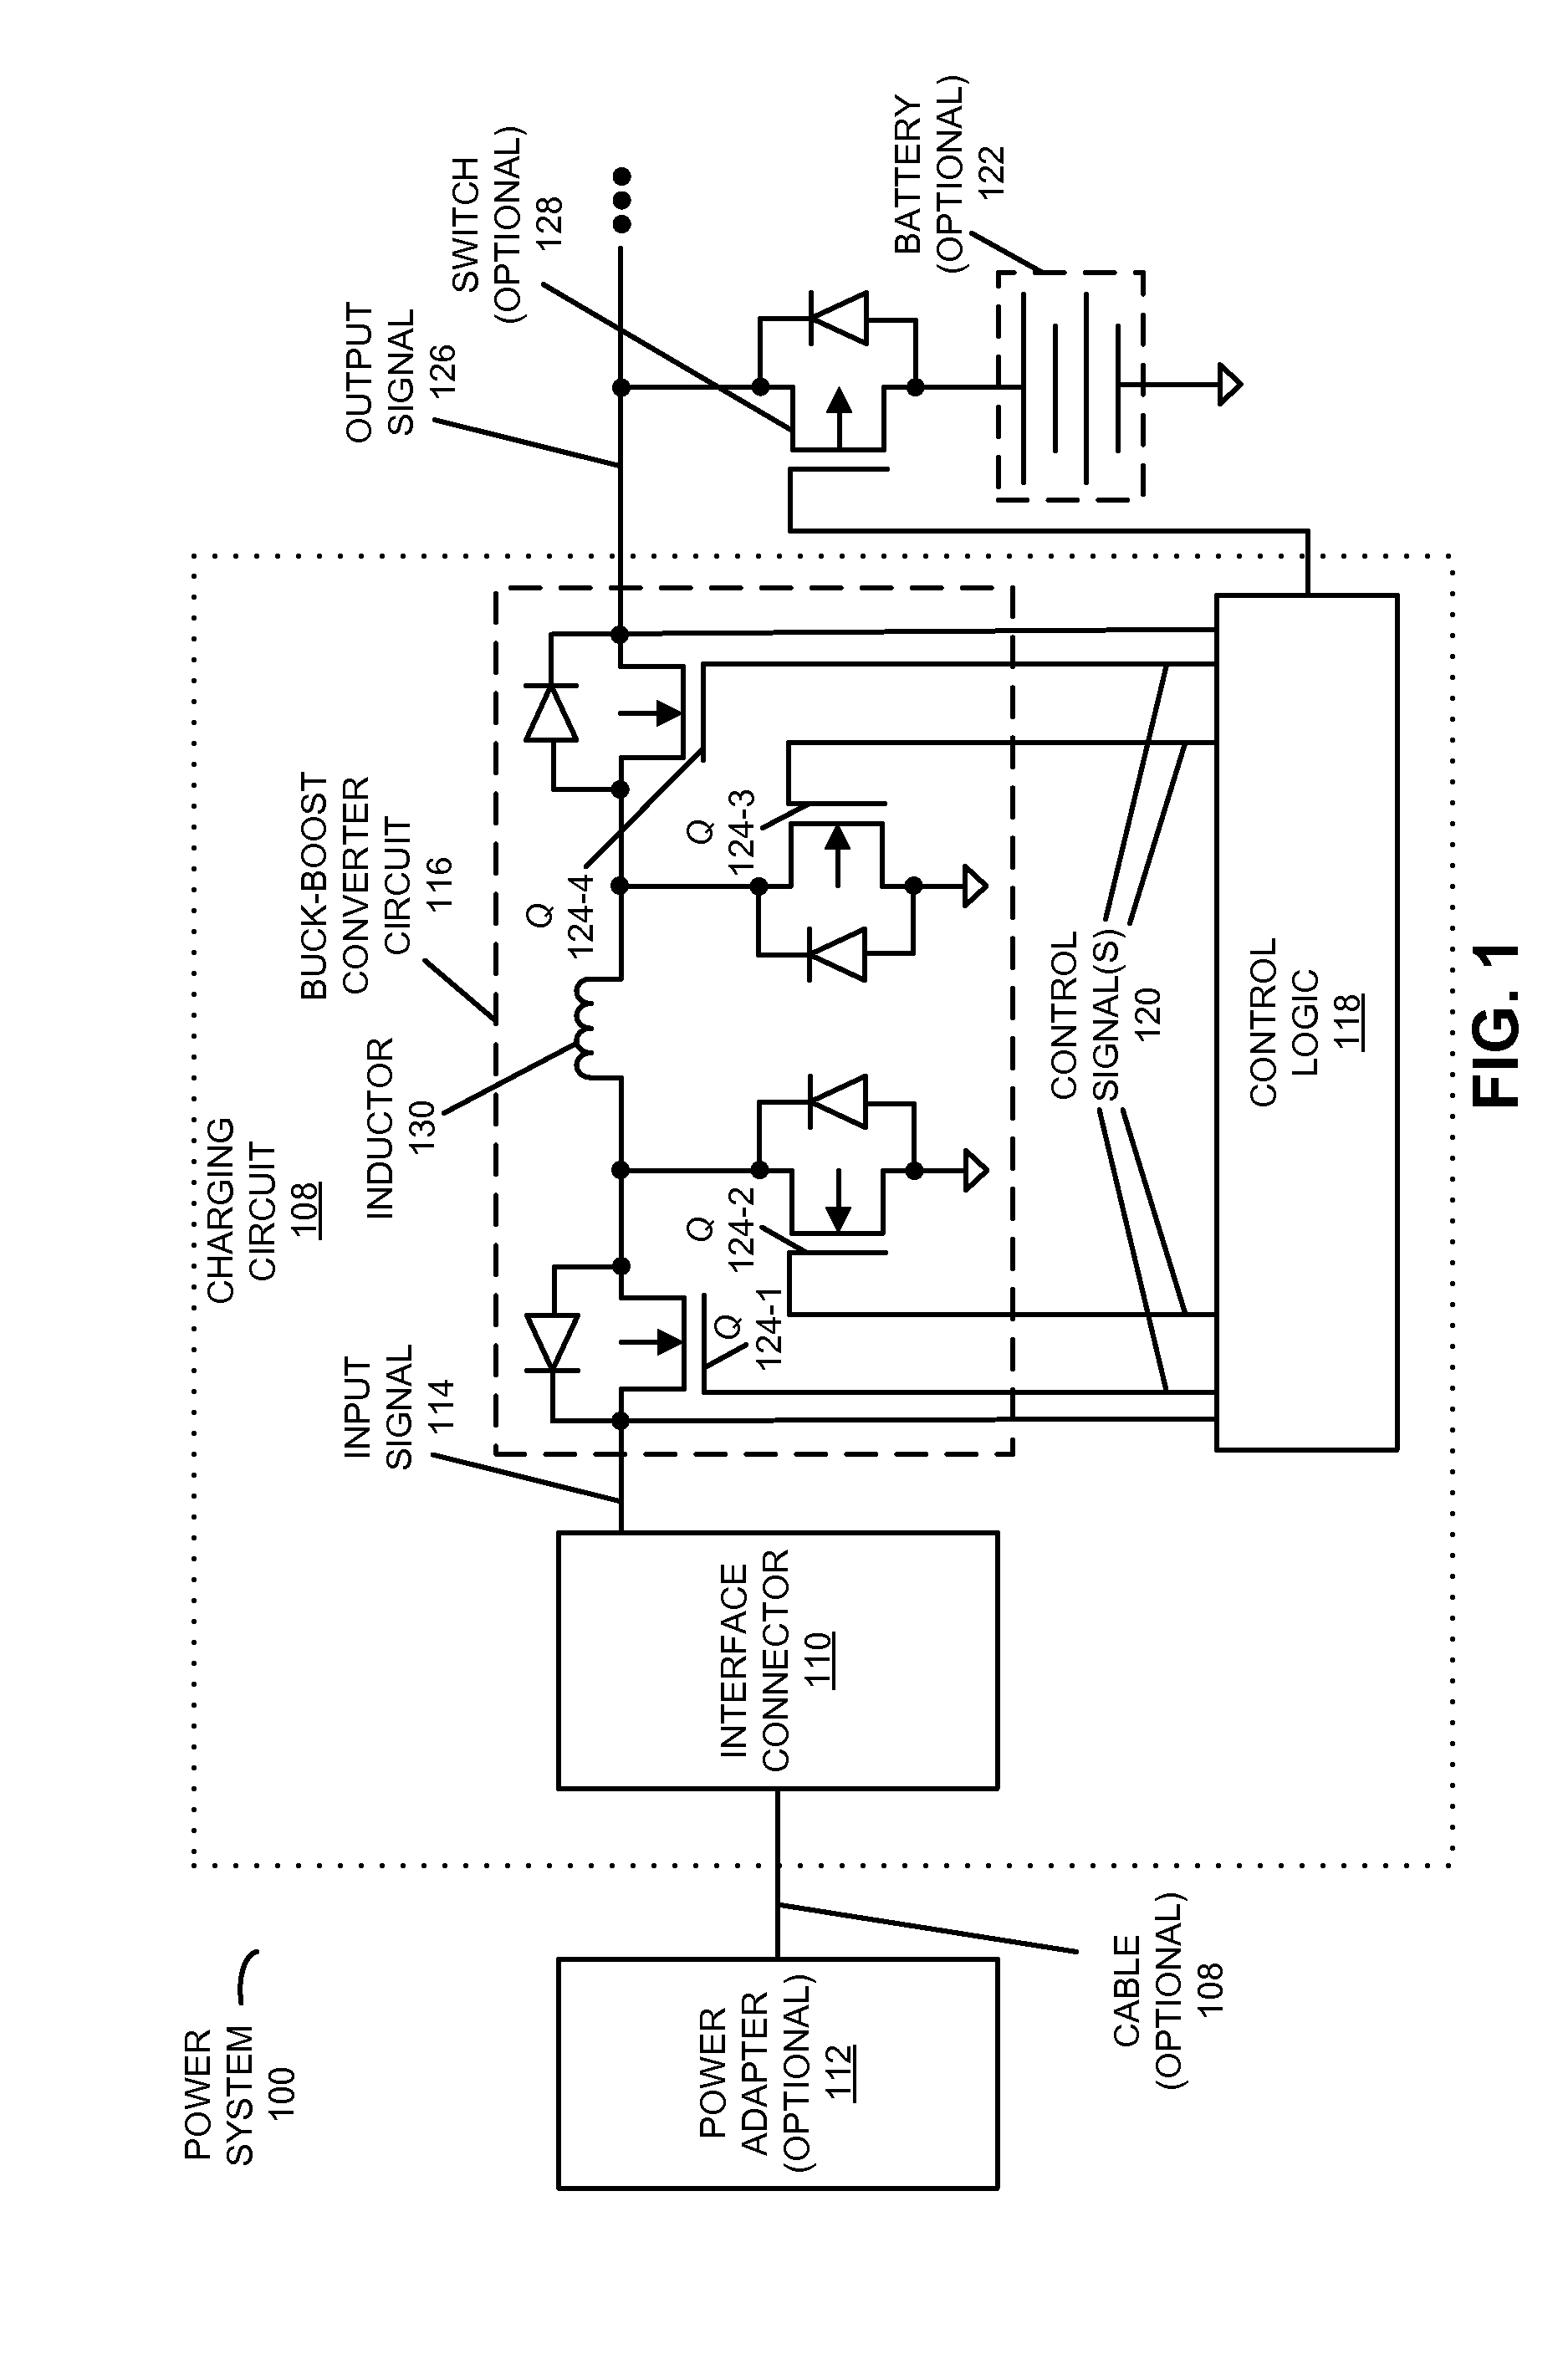 Reconfigurable compensator with large-signal stabilizing network